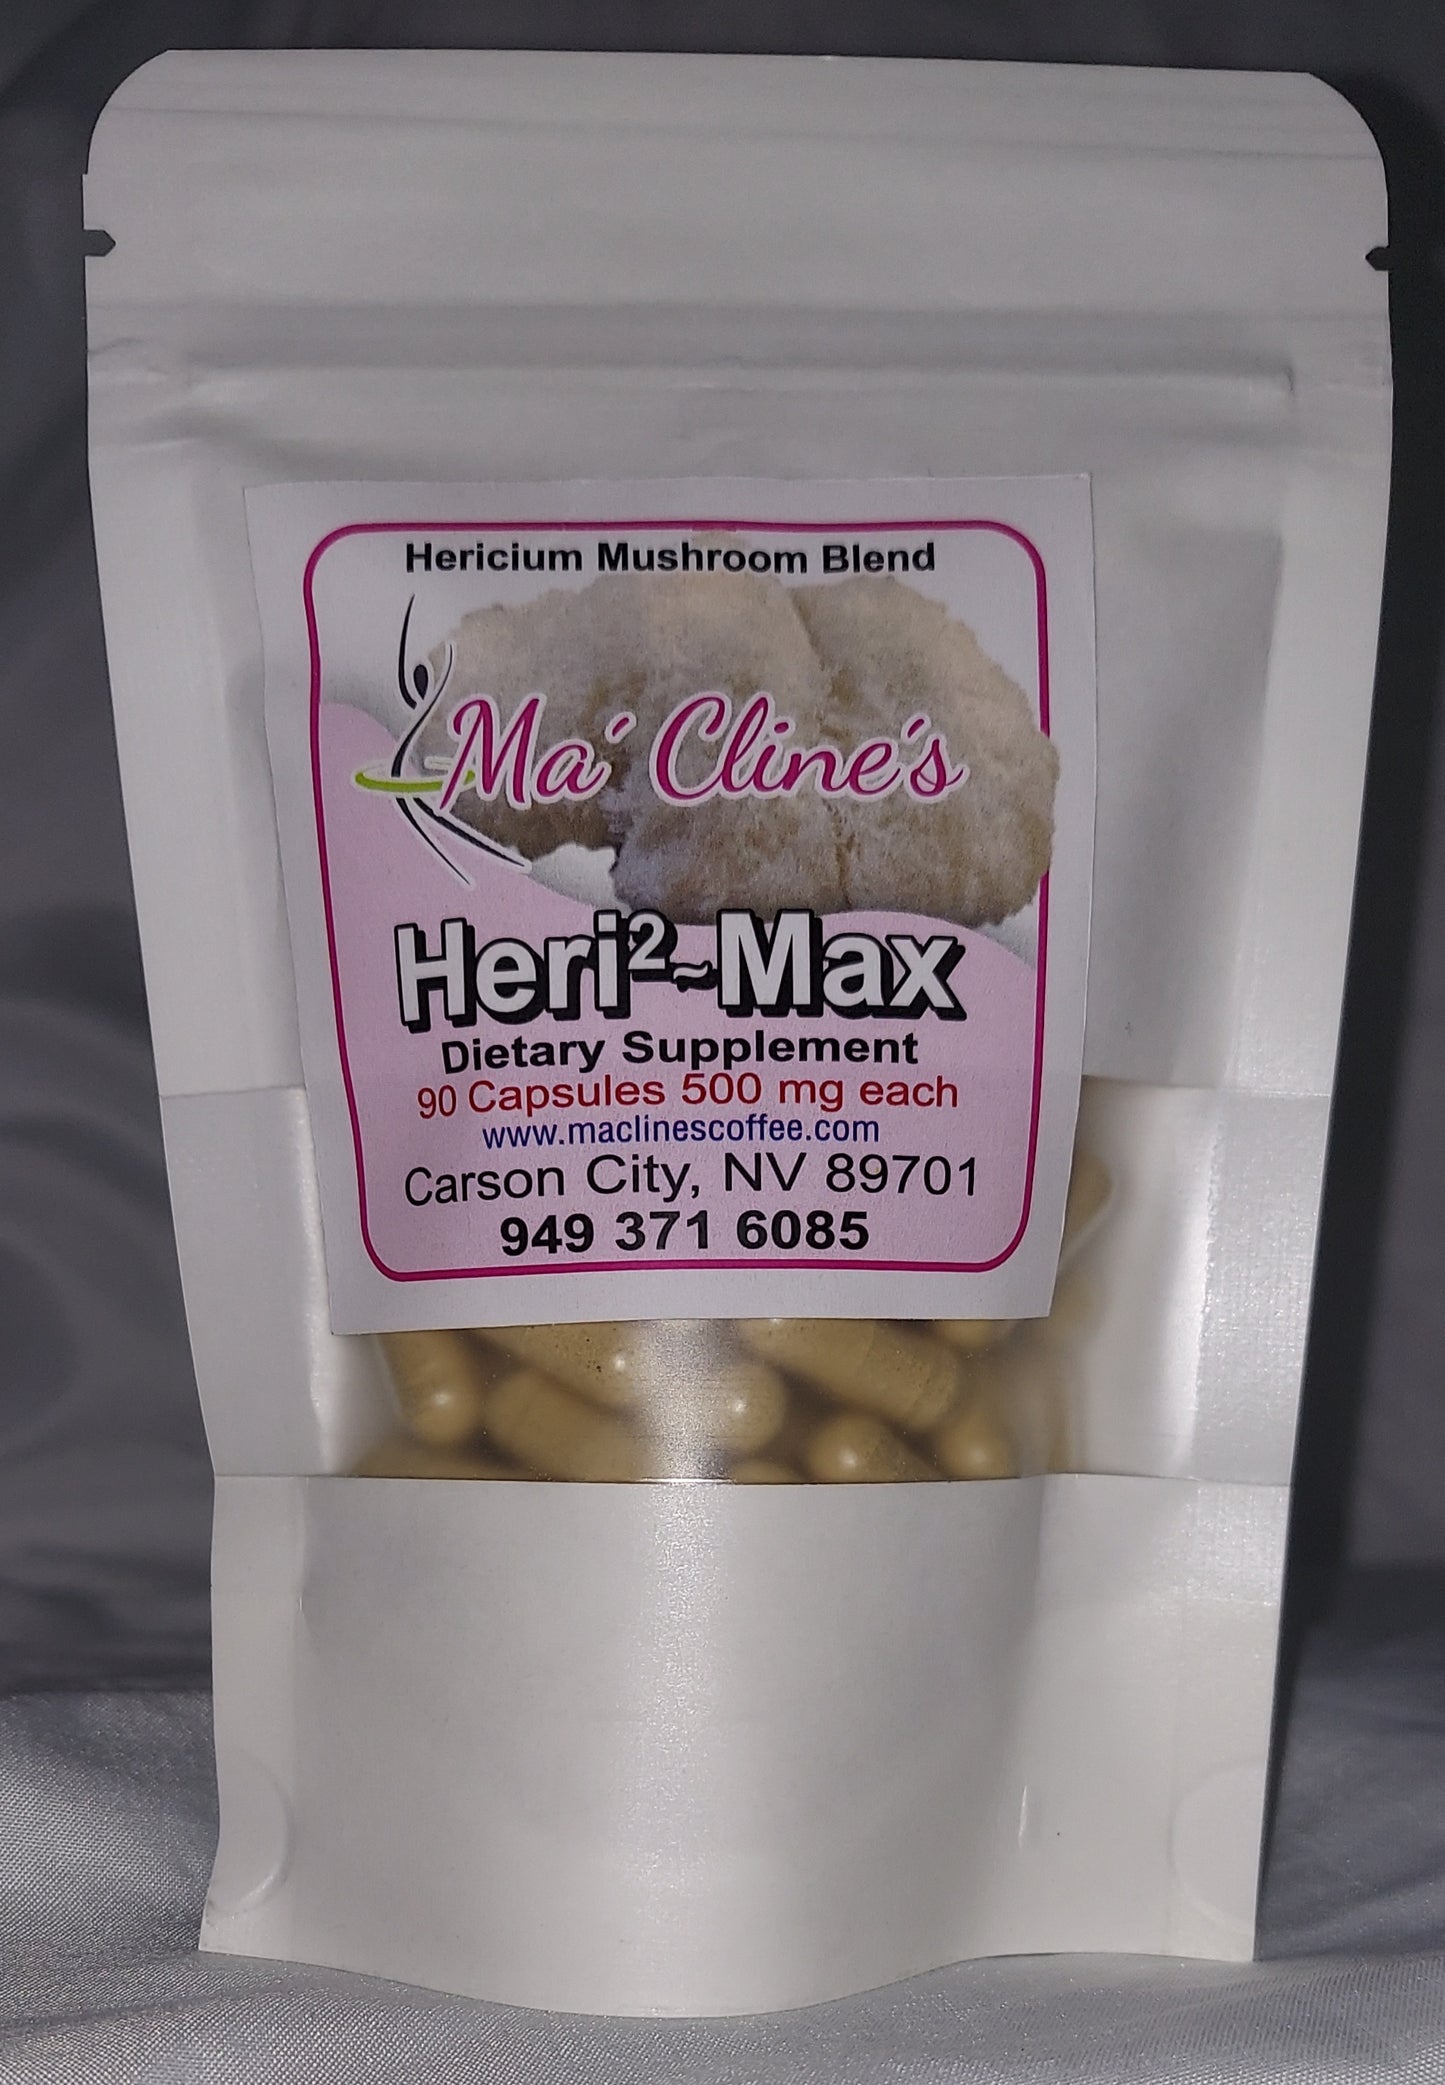 Photo of the bag and front label of Ma' Cline's Heri2~Max a dietary supplement. Lion's Mane Mushroom Blend 90 food capsules 500 mg each. www.maclinescoffee.com, Carson City, NV 89701, 949-371-6085, background photo of Lion's Mane, hericium erinaceus, which looks like a fuzzy lion's mane.